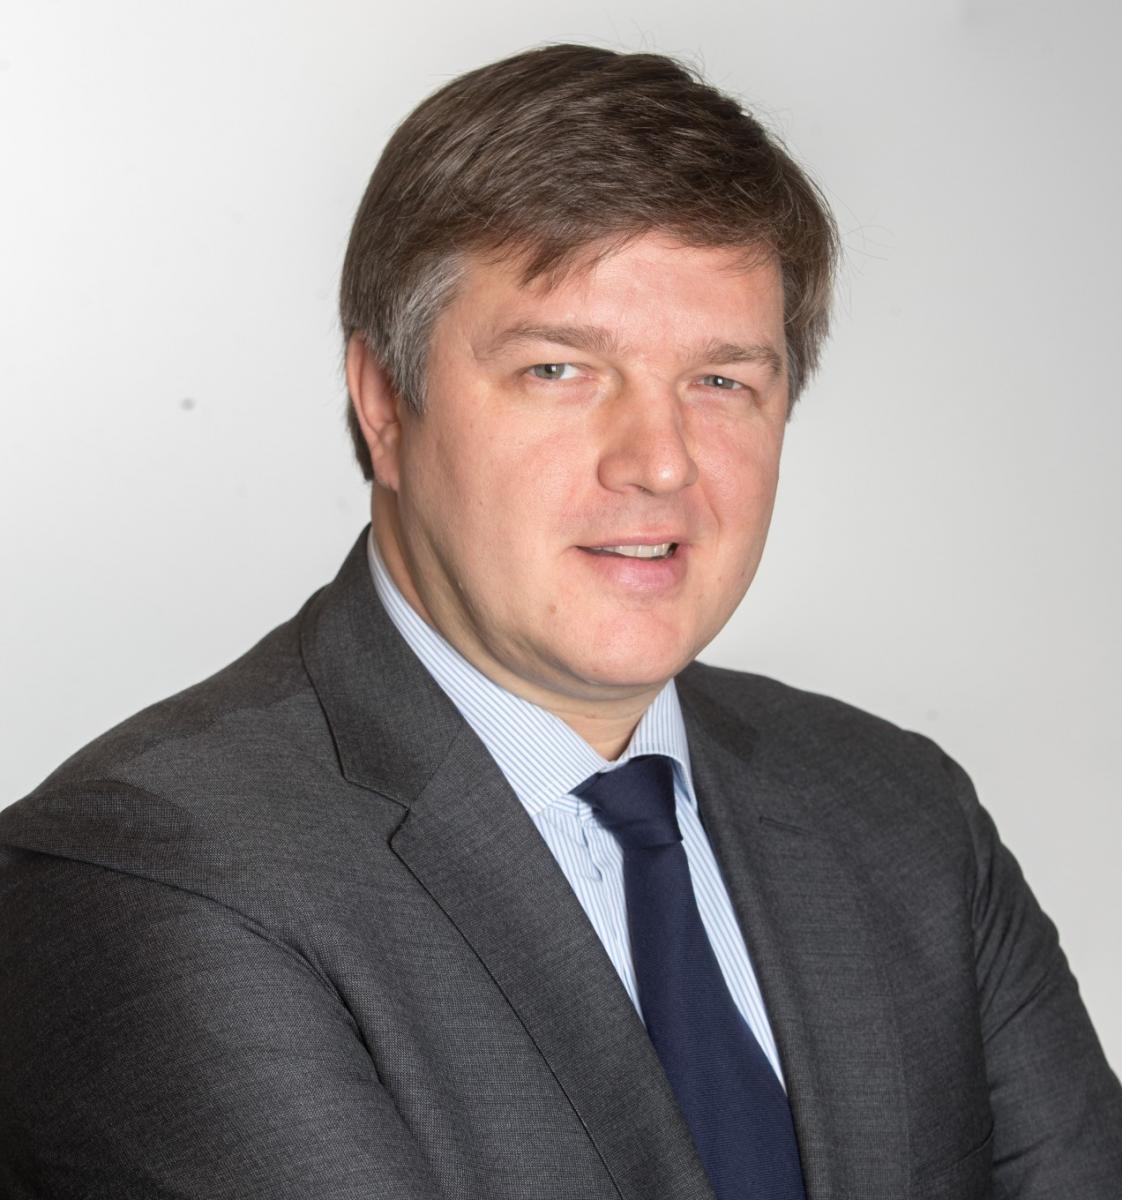 Filippe de Potter is the deputy director of inward investment at Flanders Investment and Trade.